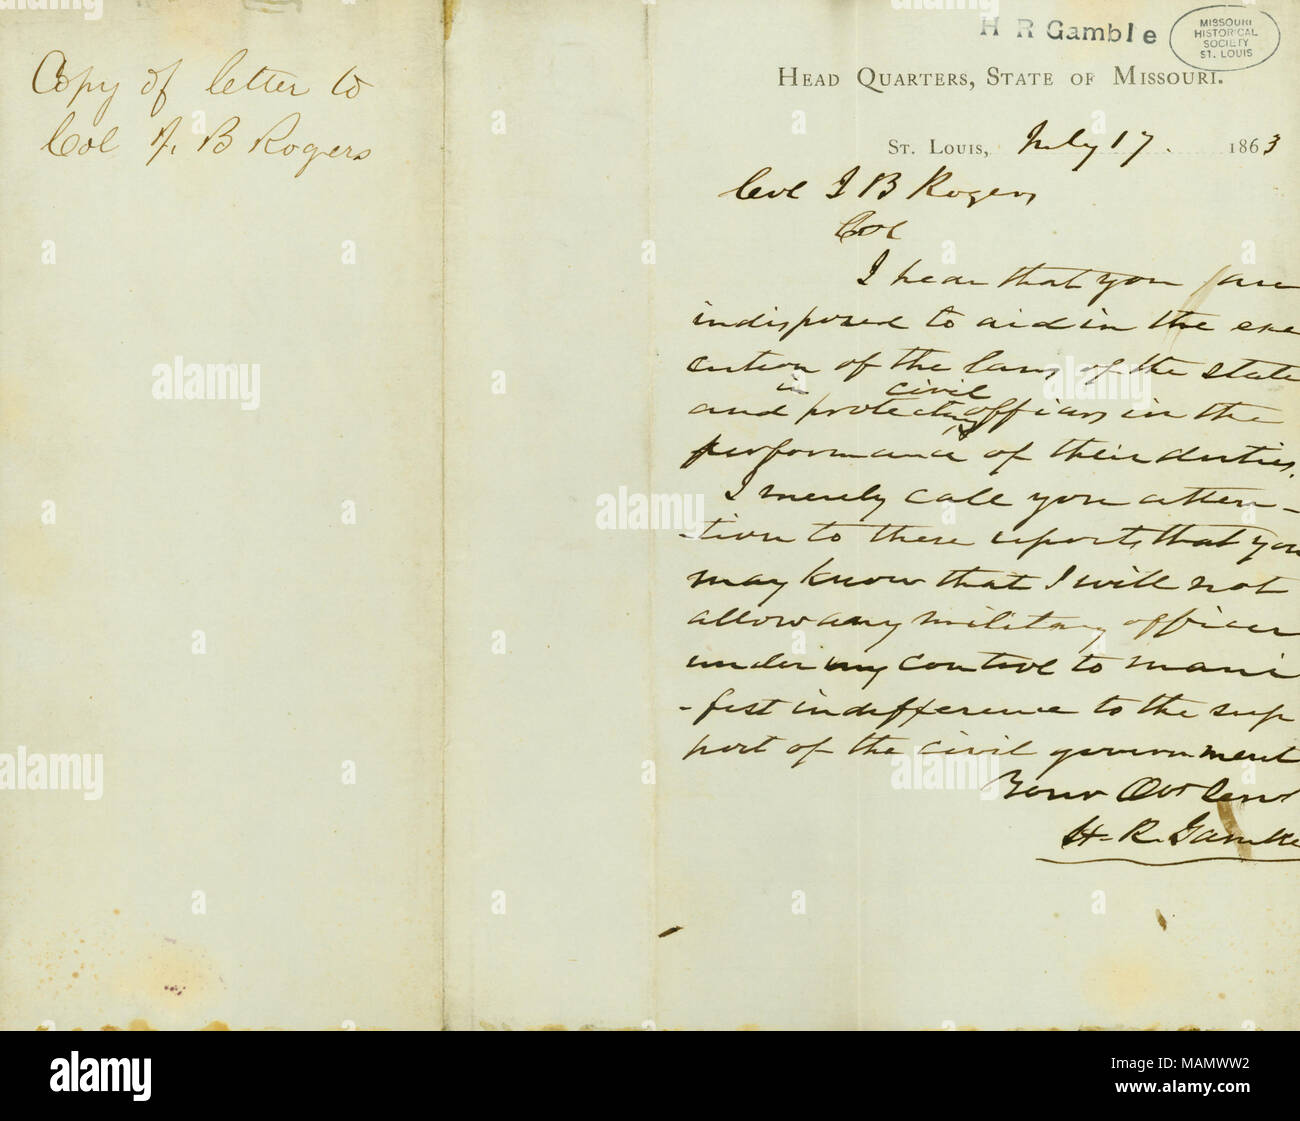 Reprimands the militia officer for not upholding his duty. Title: Contemporary copy of letter signed H.R. Gamble, Head Quarters, State of Missouri, St. Louis, to Col. J.B. Rogers, July 17, 1863  . 17 July 1863. Gamble, Hamilton Rowan, 1798-1864 Stock Photo